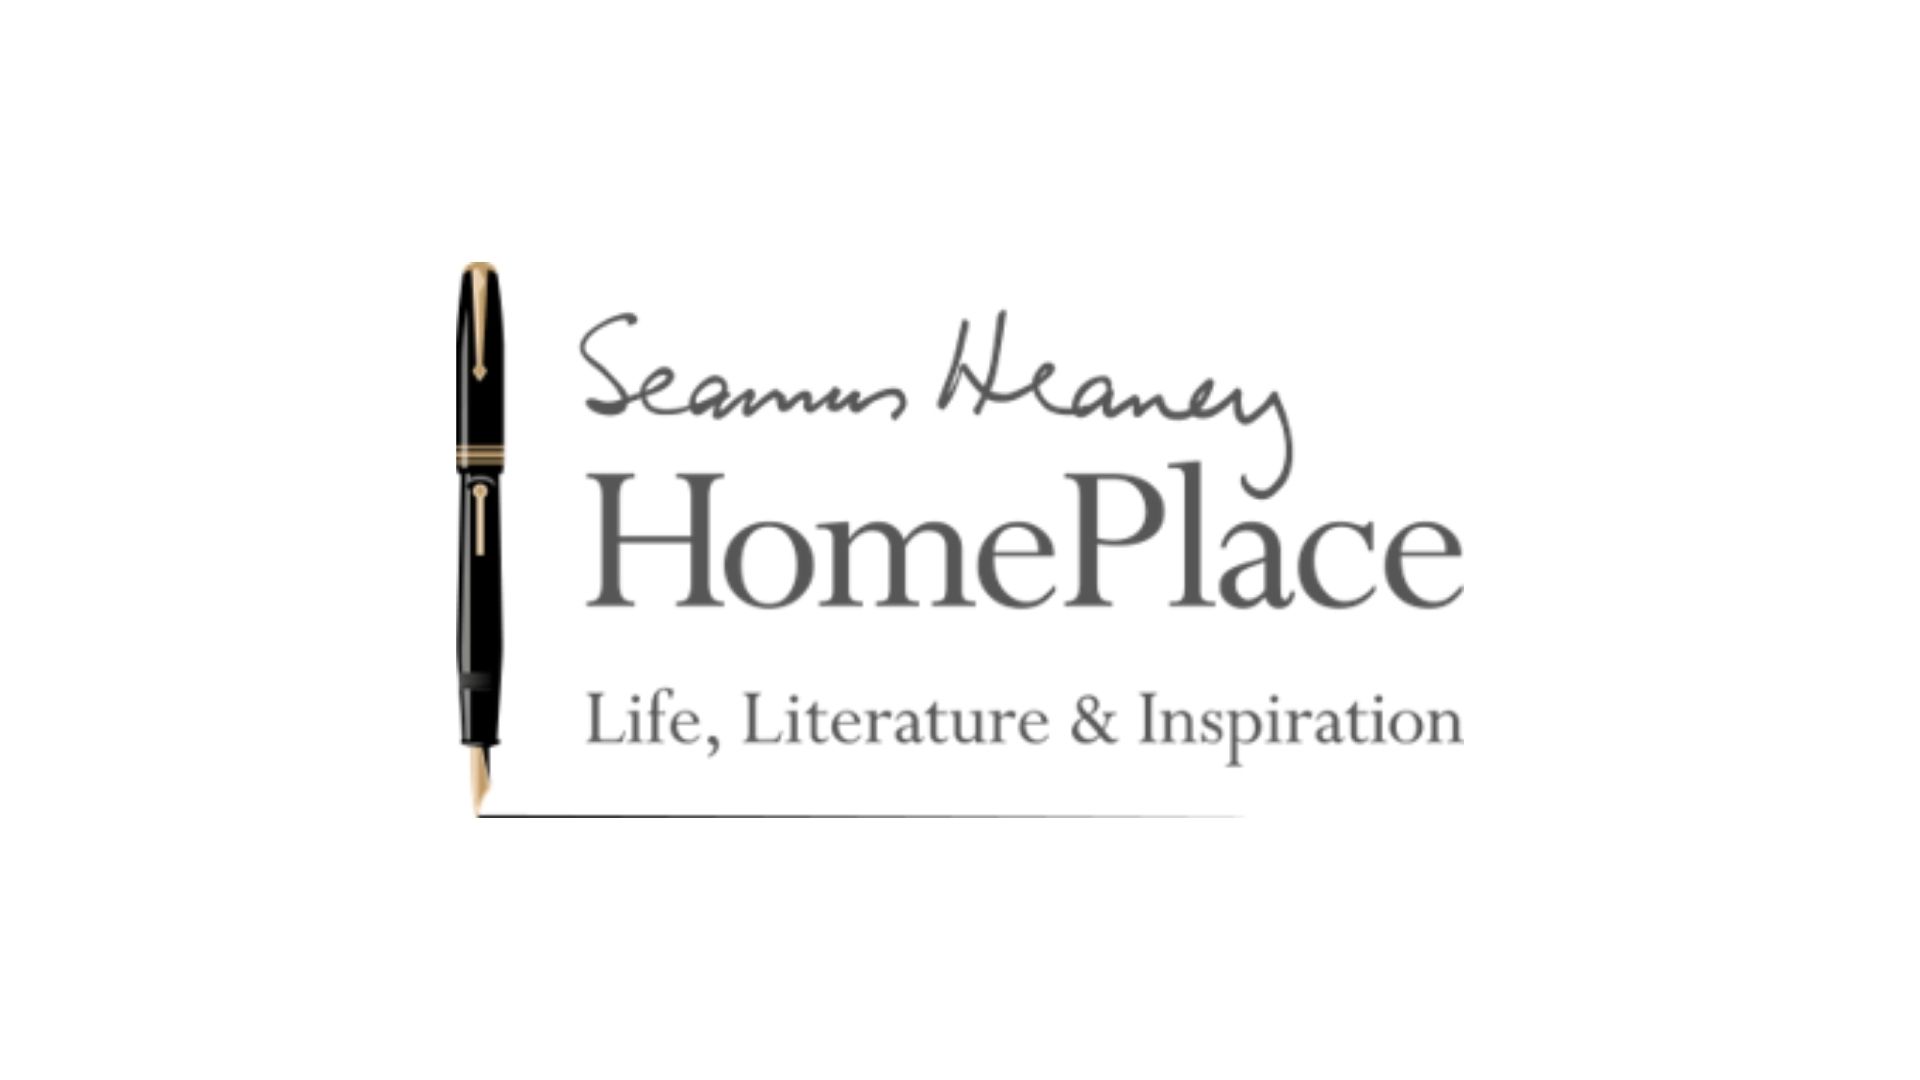 Seamus Heaney HomePlace"